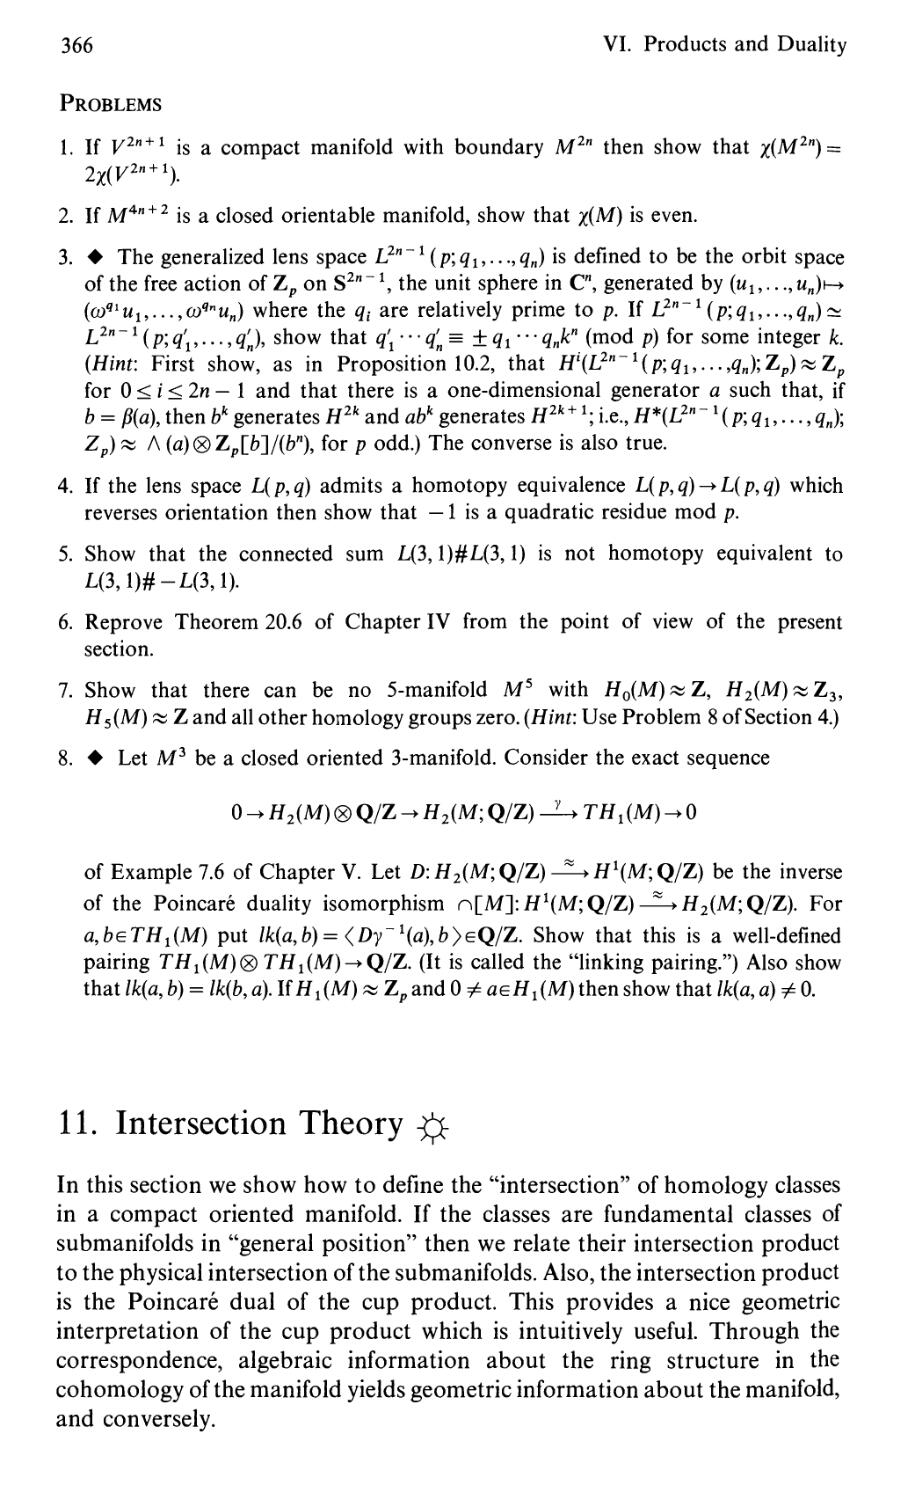 11. Intersection Theory